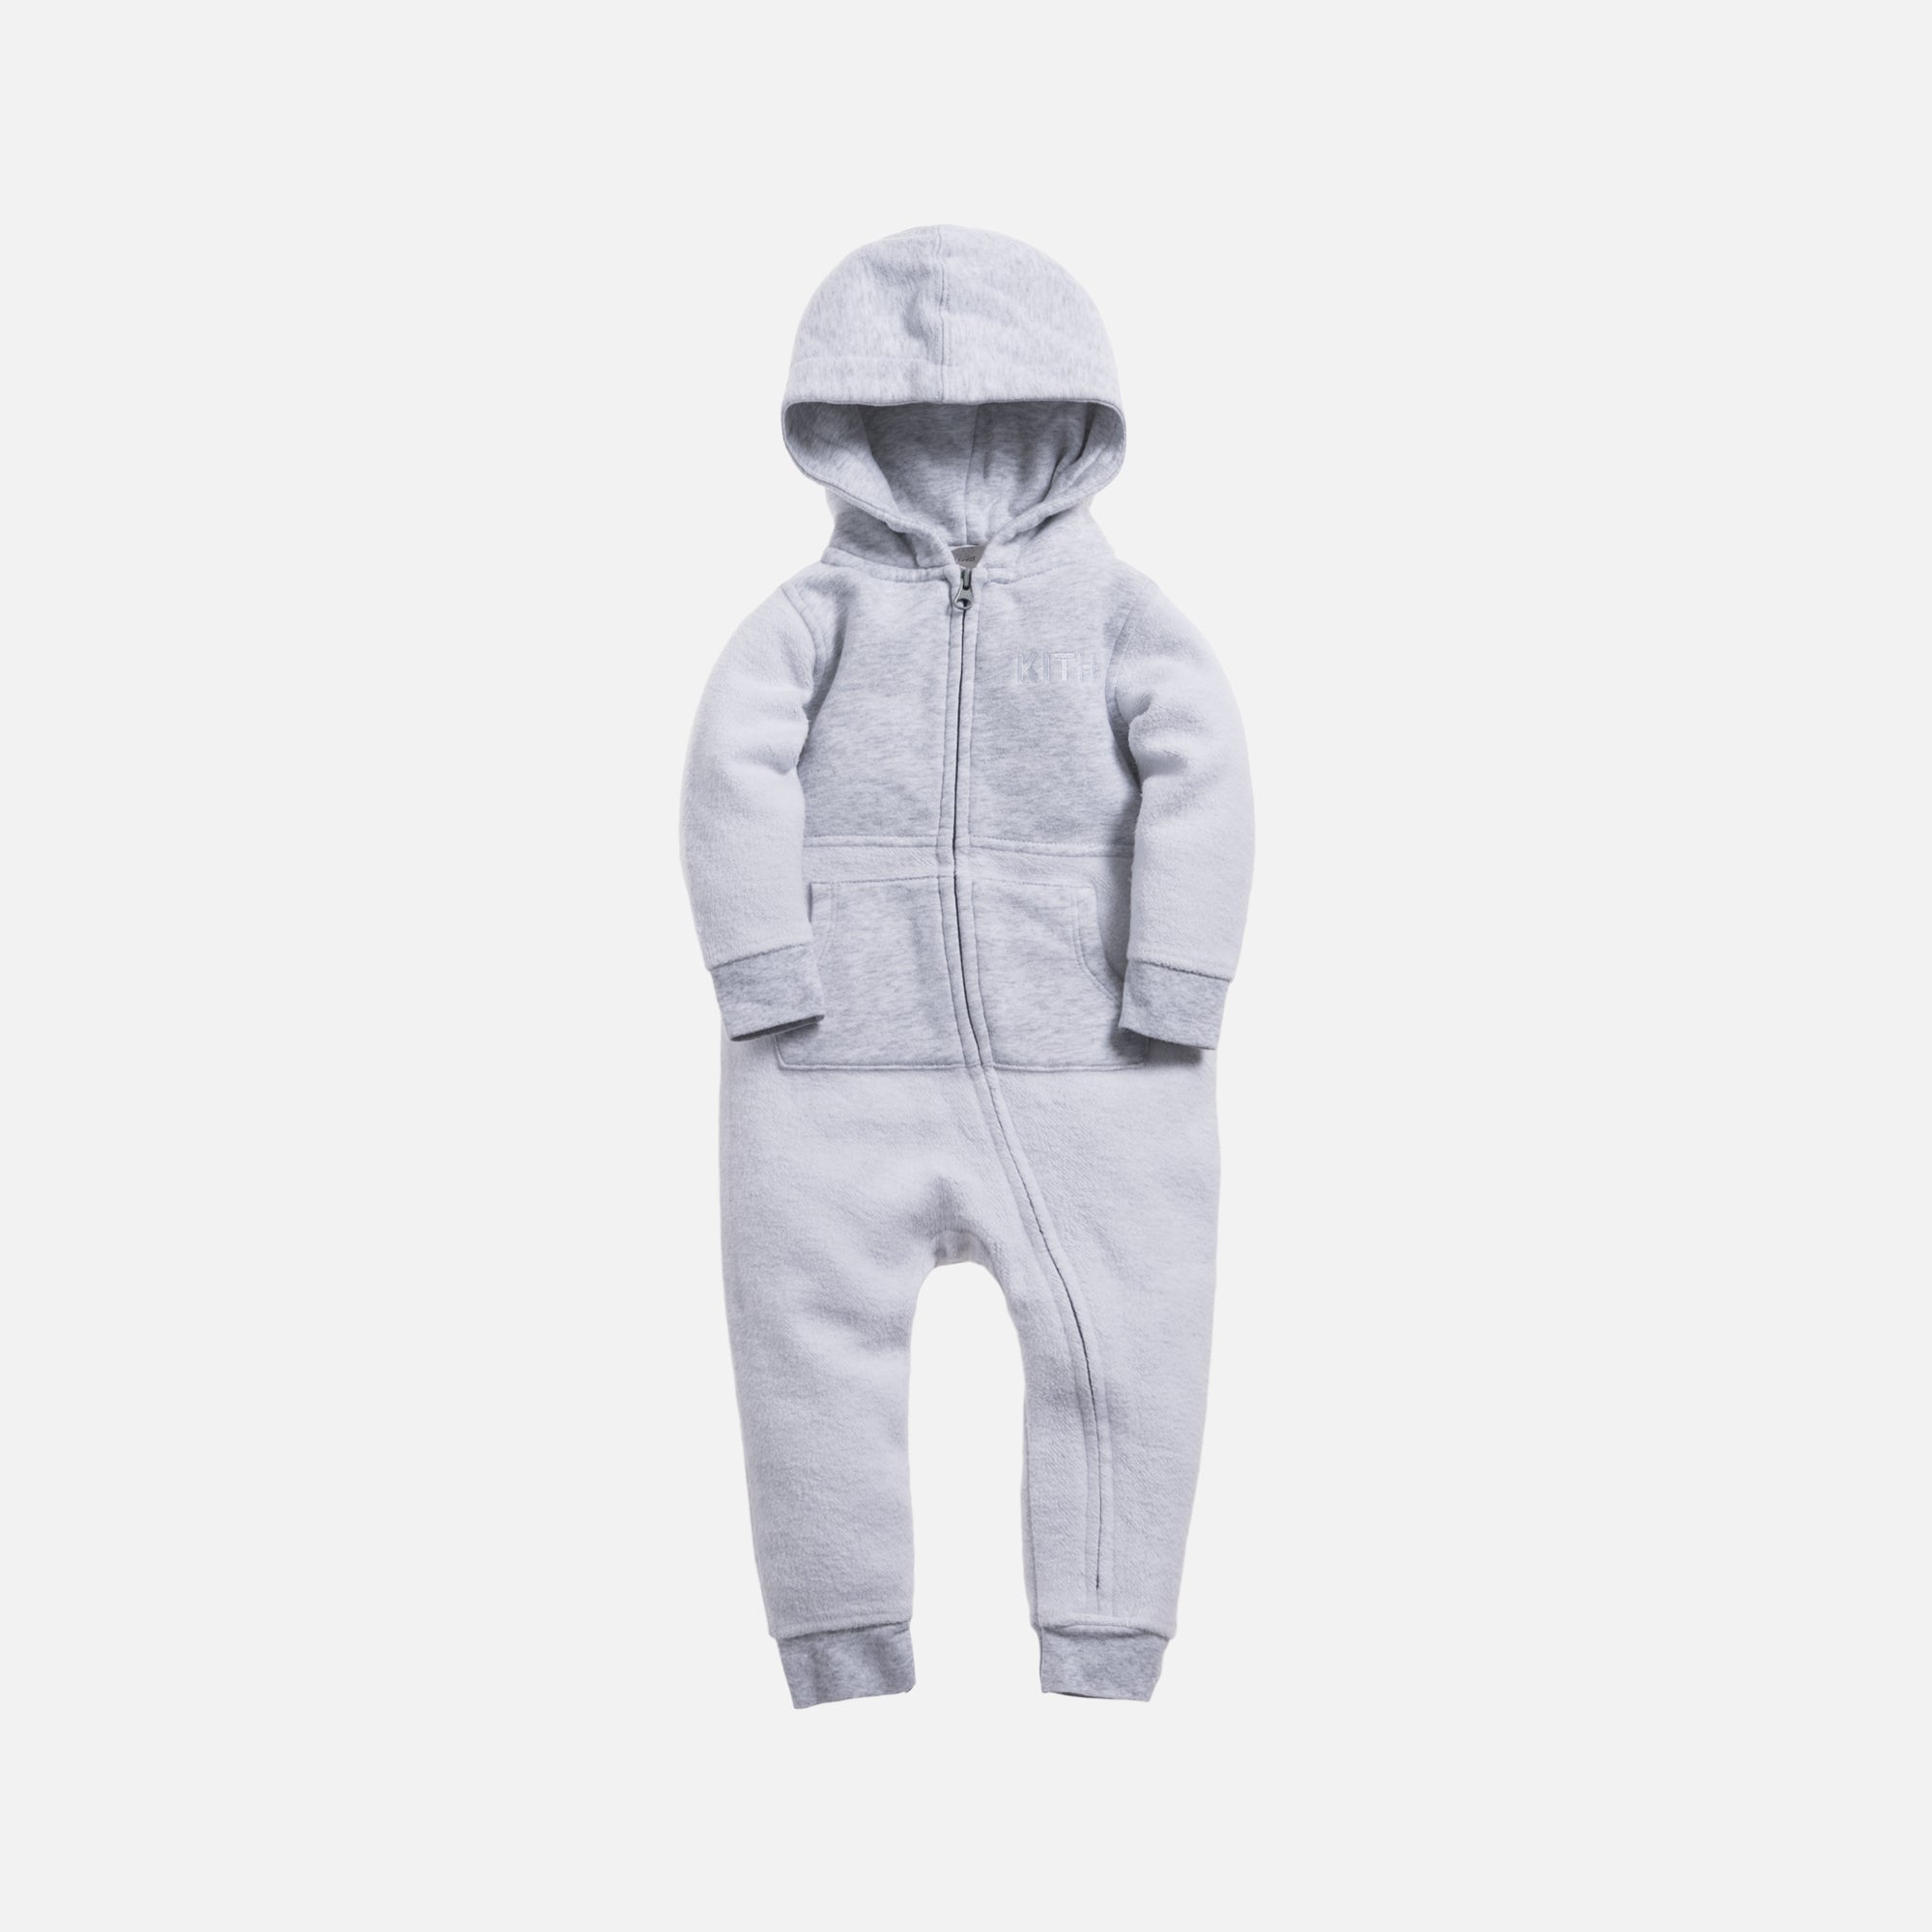 Kith Kids Toddlers Blocked Williams Coverall - Heather Grey